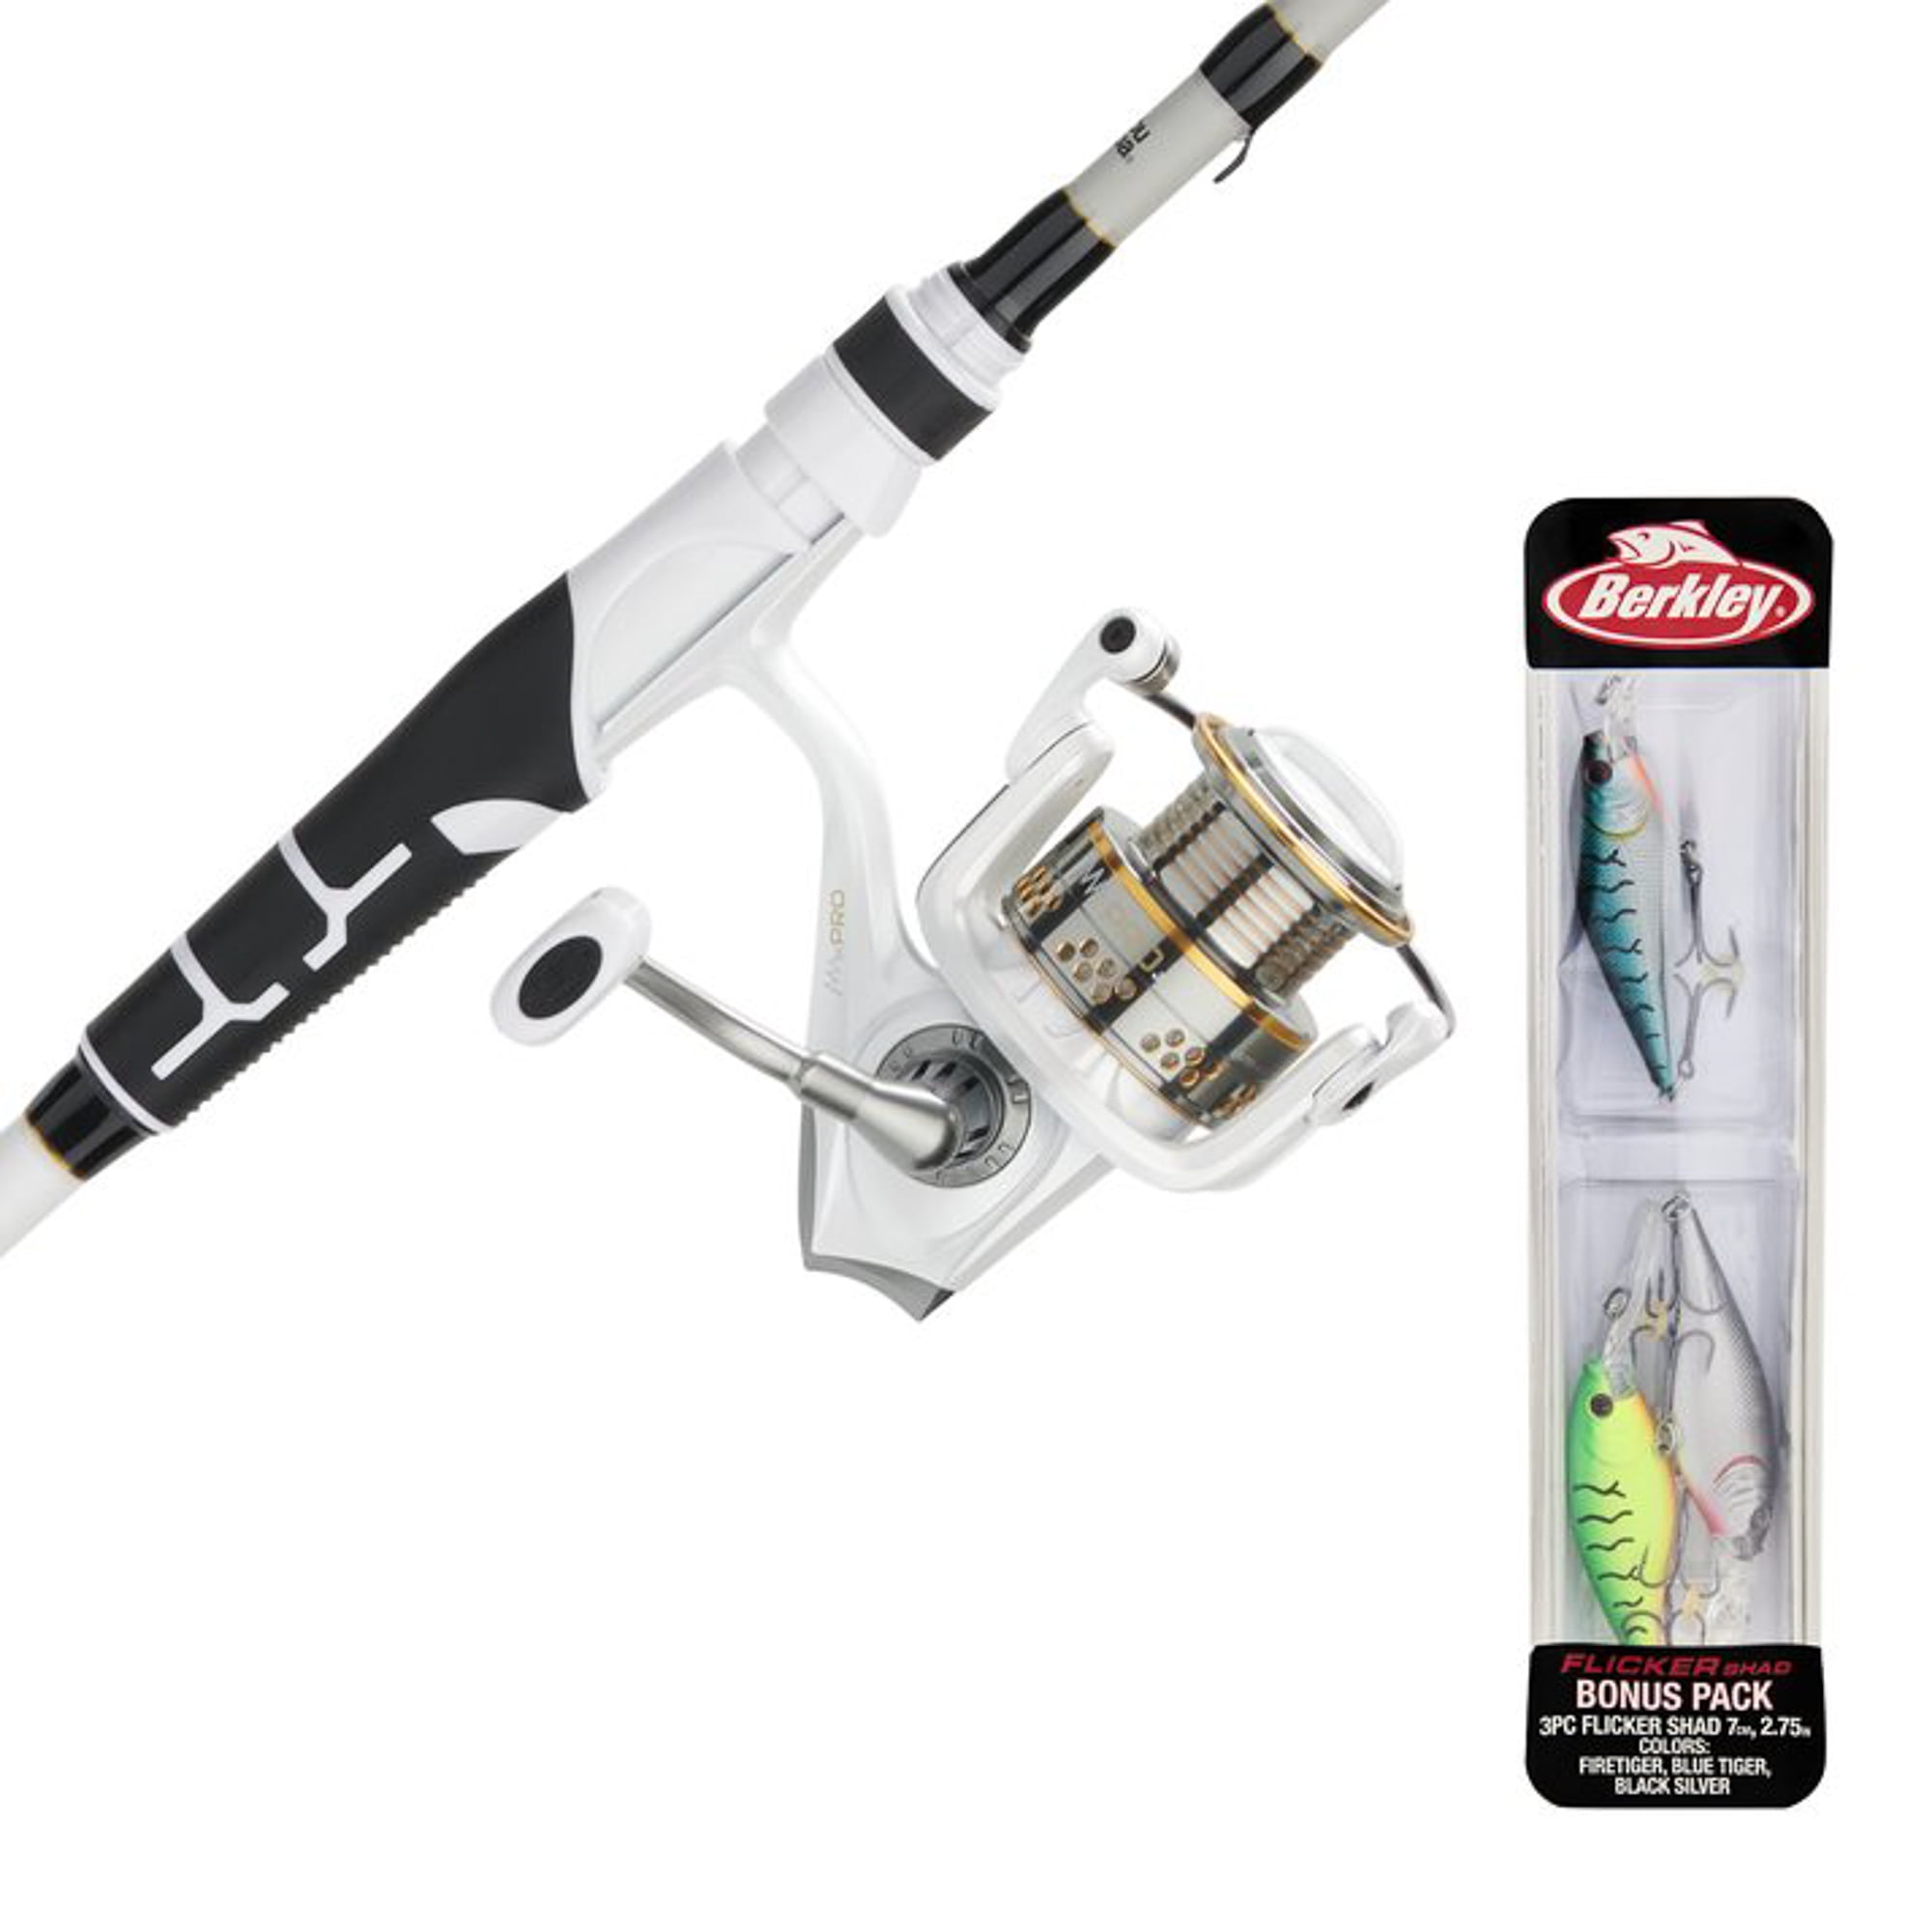 abu garcia reel rod combo, abu garcia reel rod combo Suppliers and